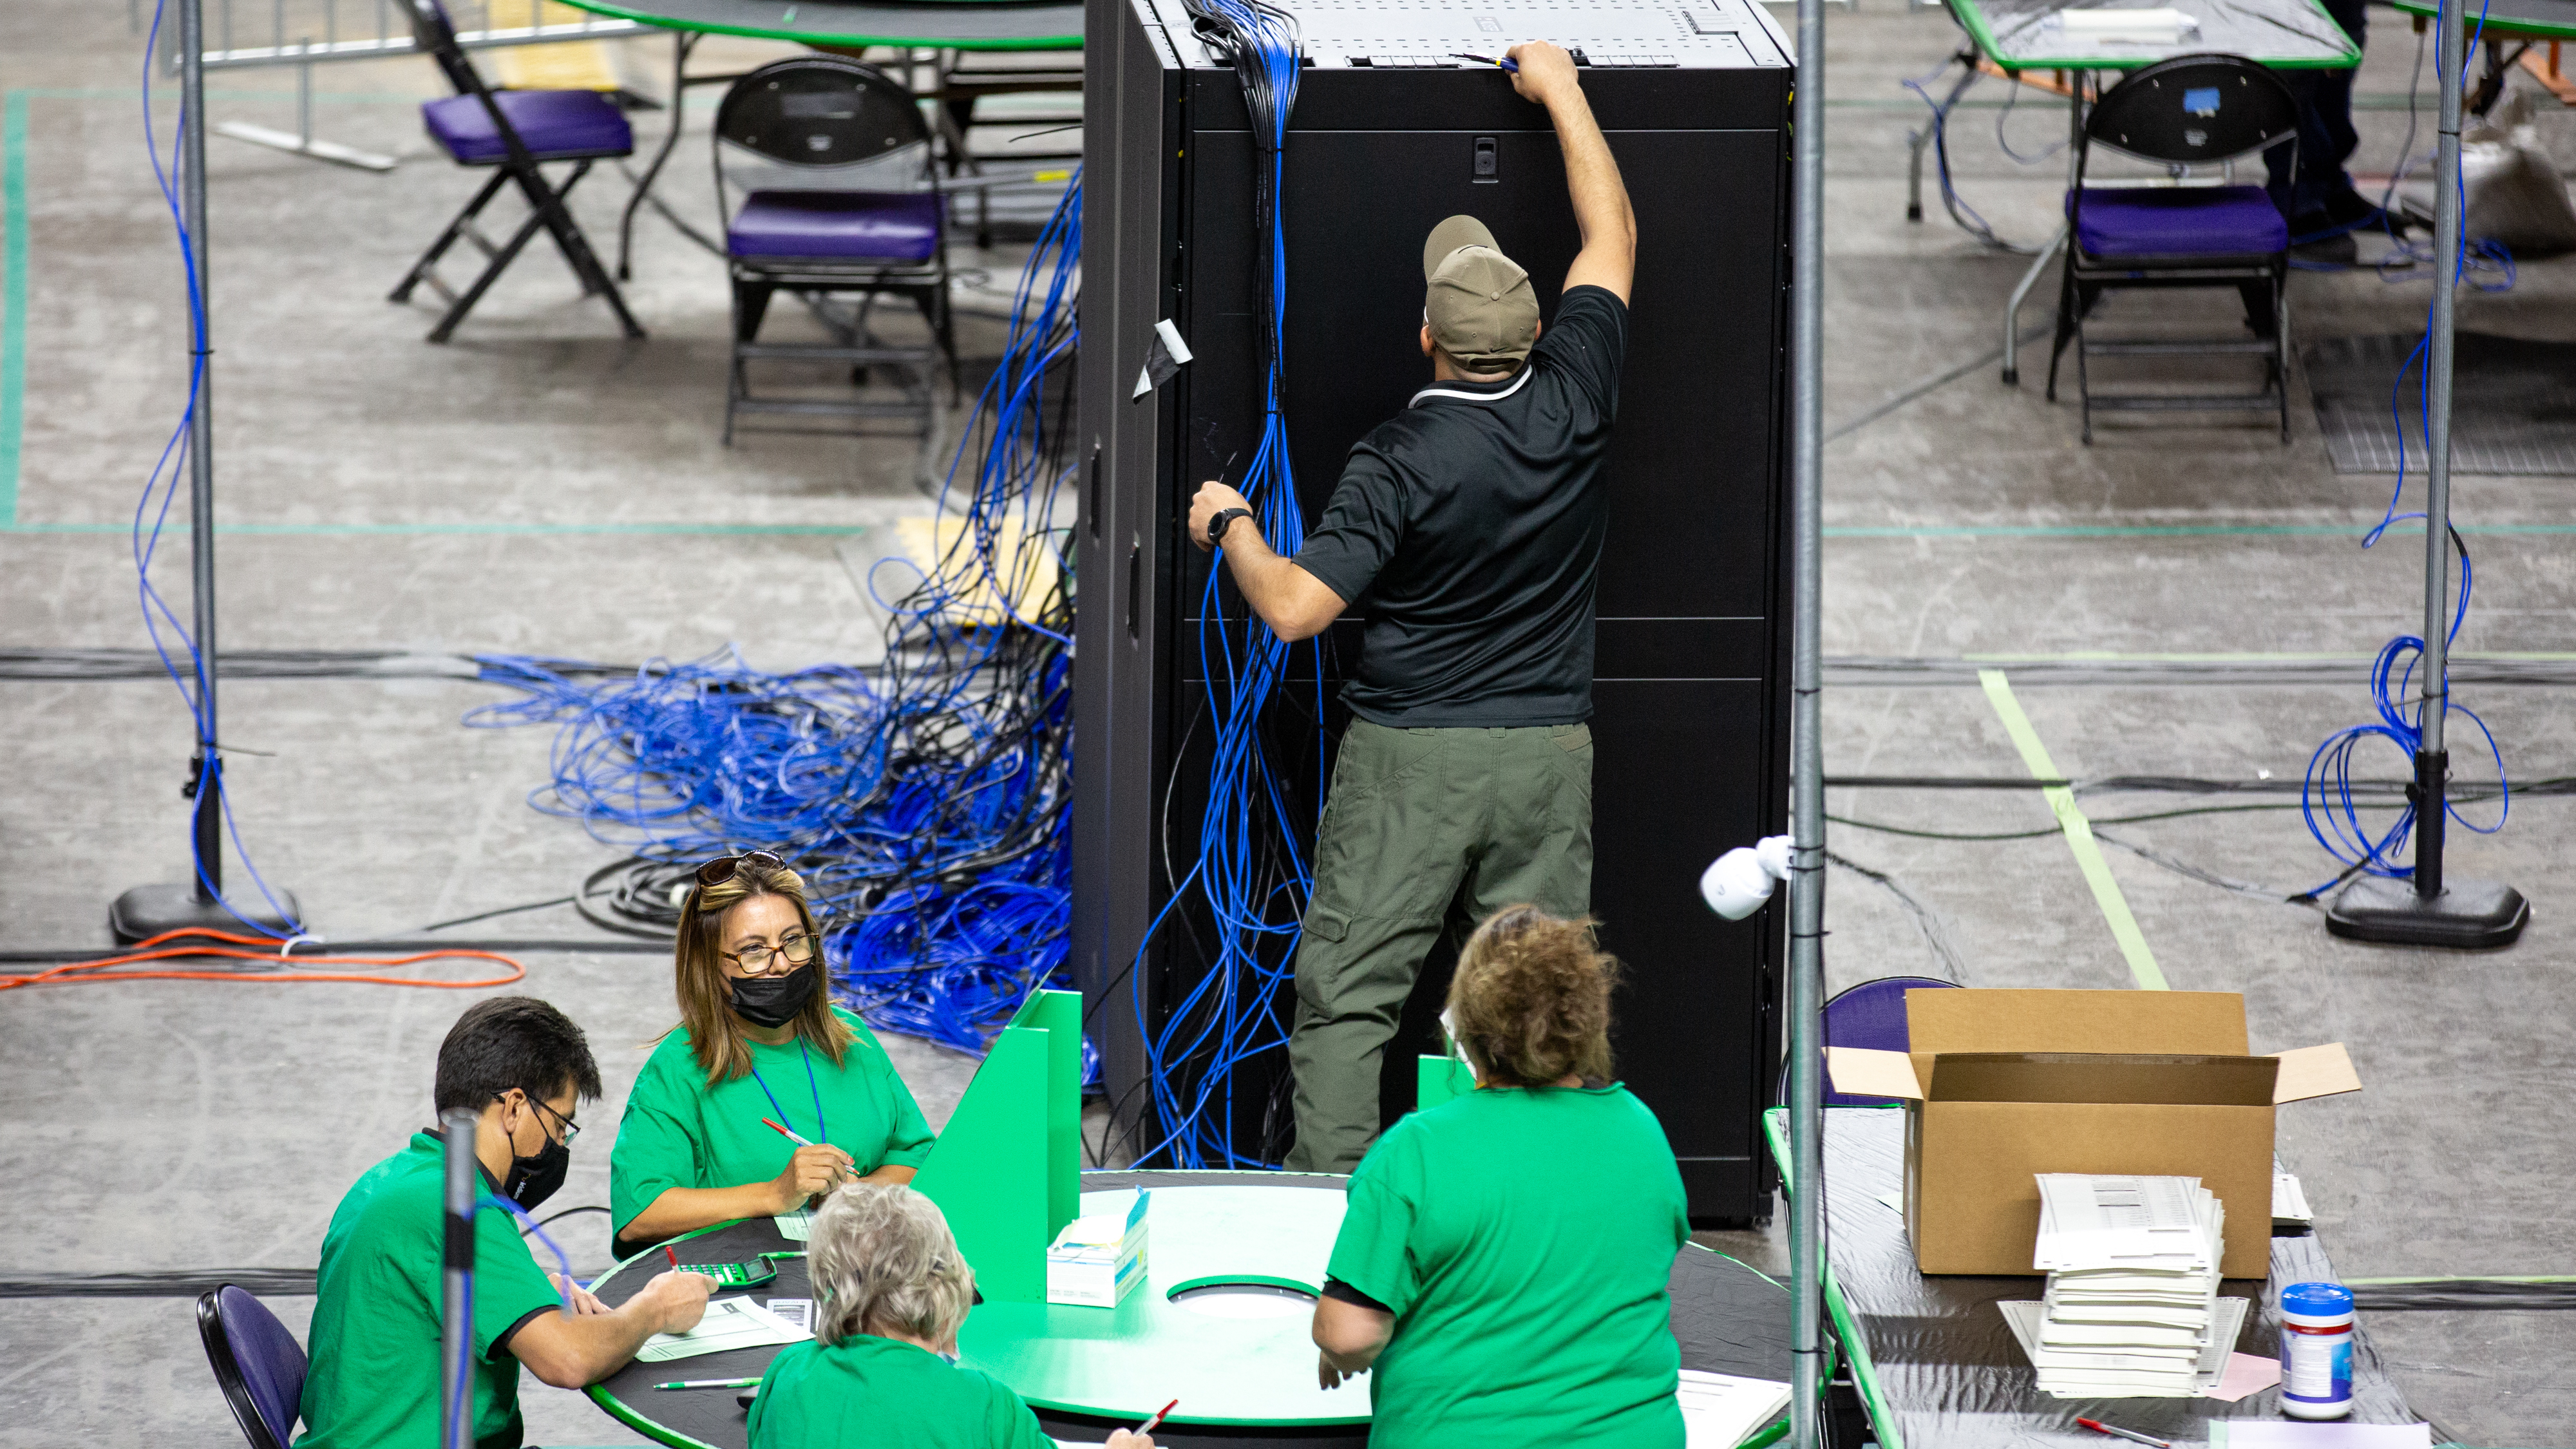 Contractors working for Cyber Ninjas, the company hired by the Republican-led Arizona state Senate, examine and recount ballots from the 2020 general election on May 3. Courtney Pedroza/The Washington Post via Getty Images